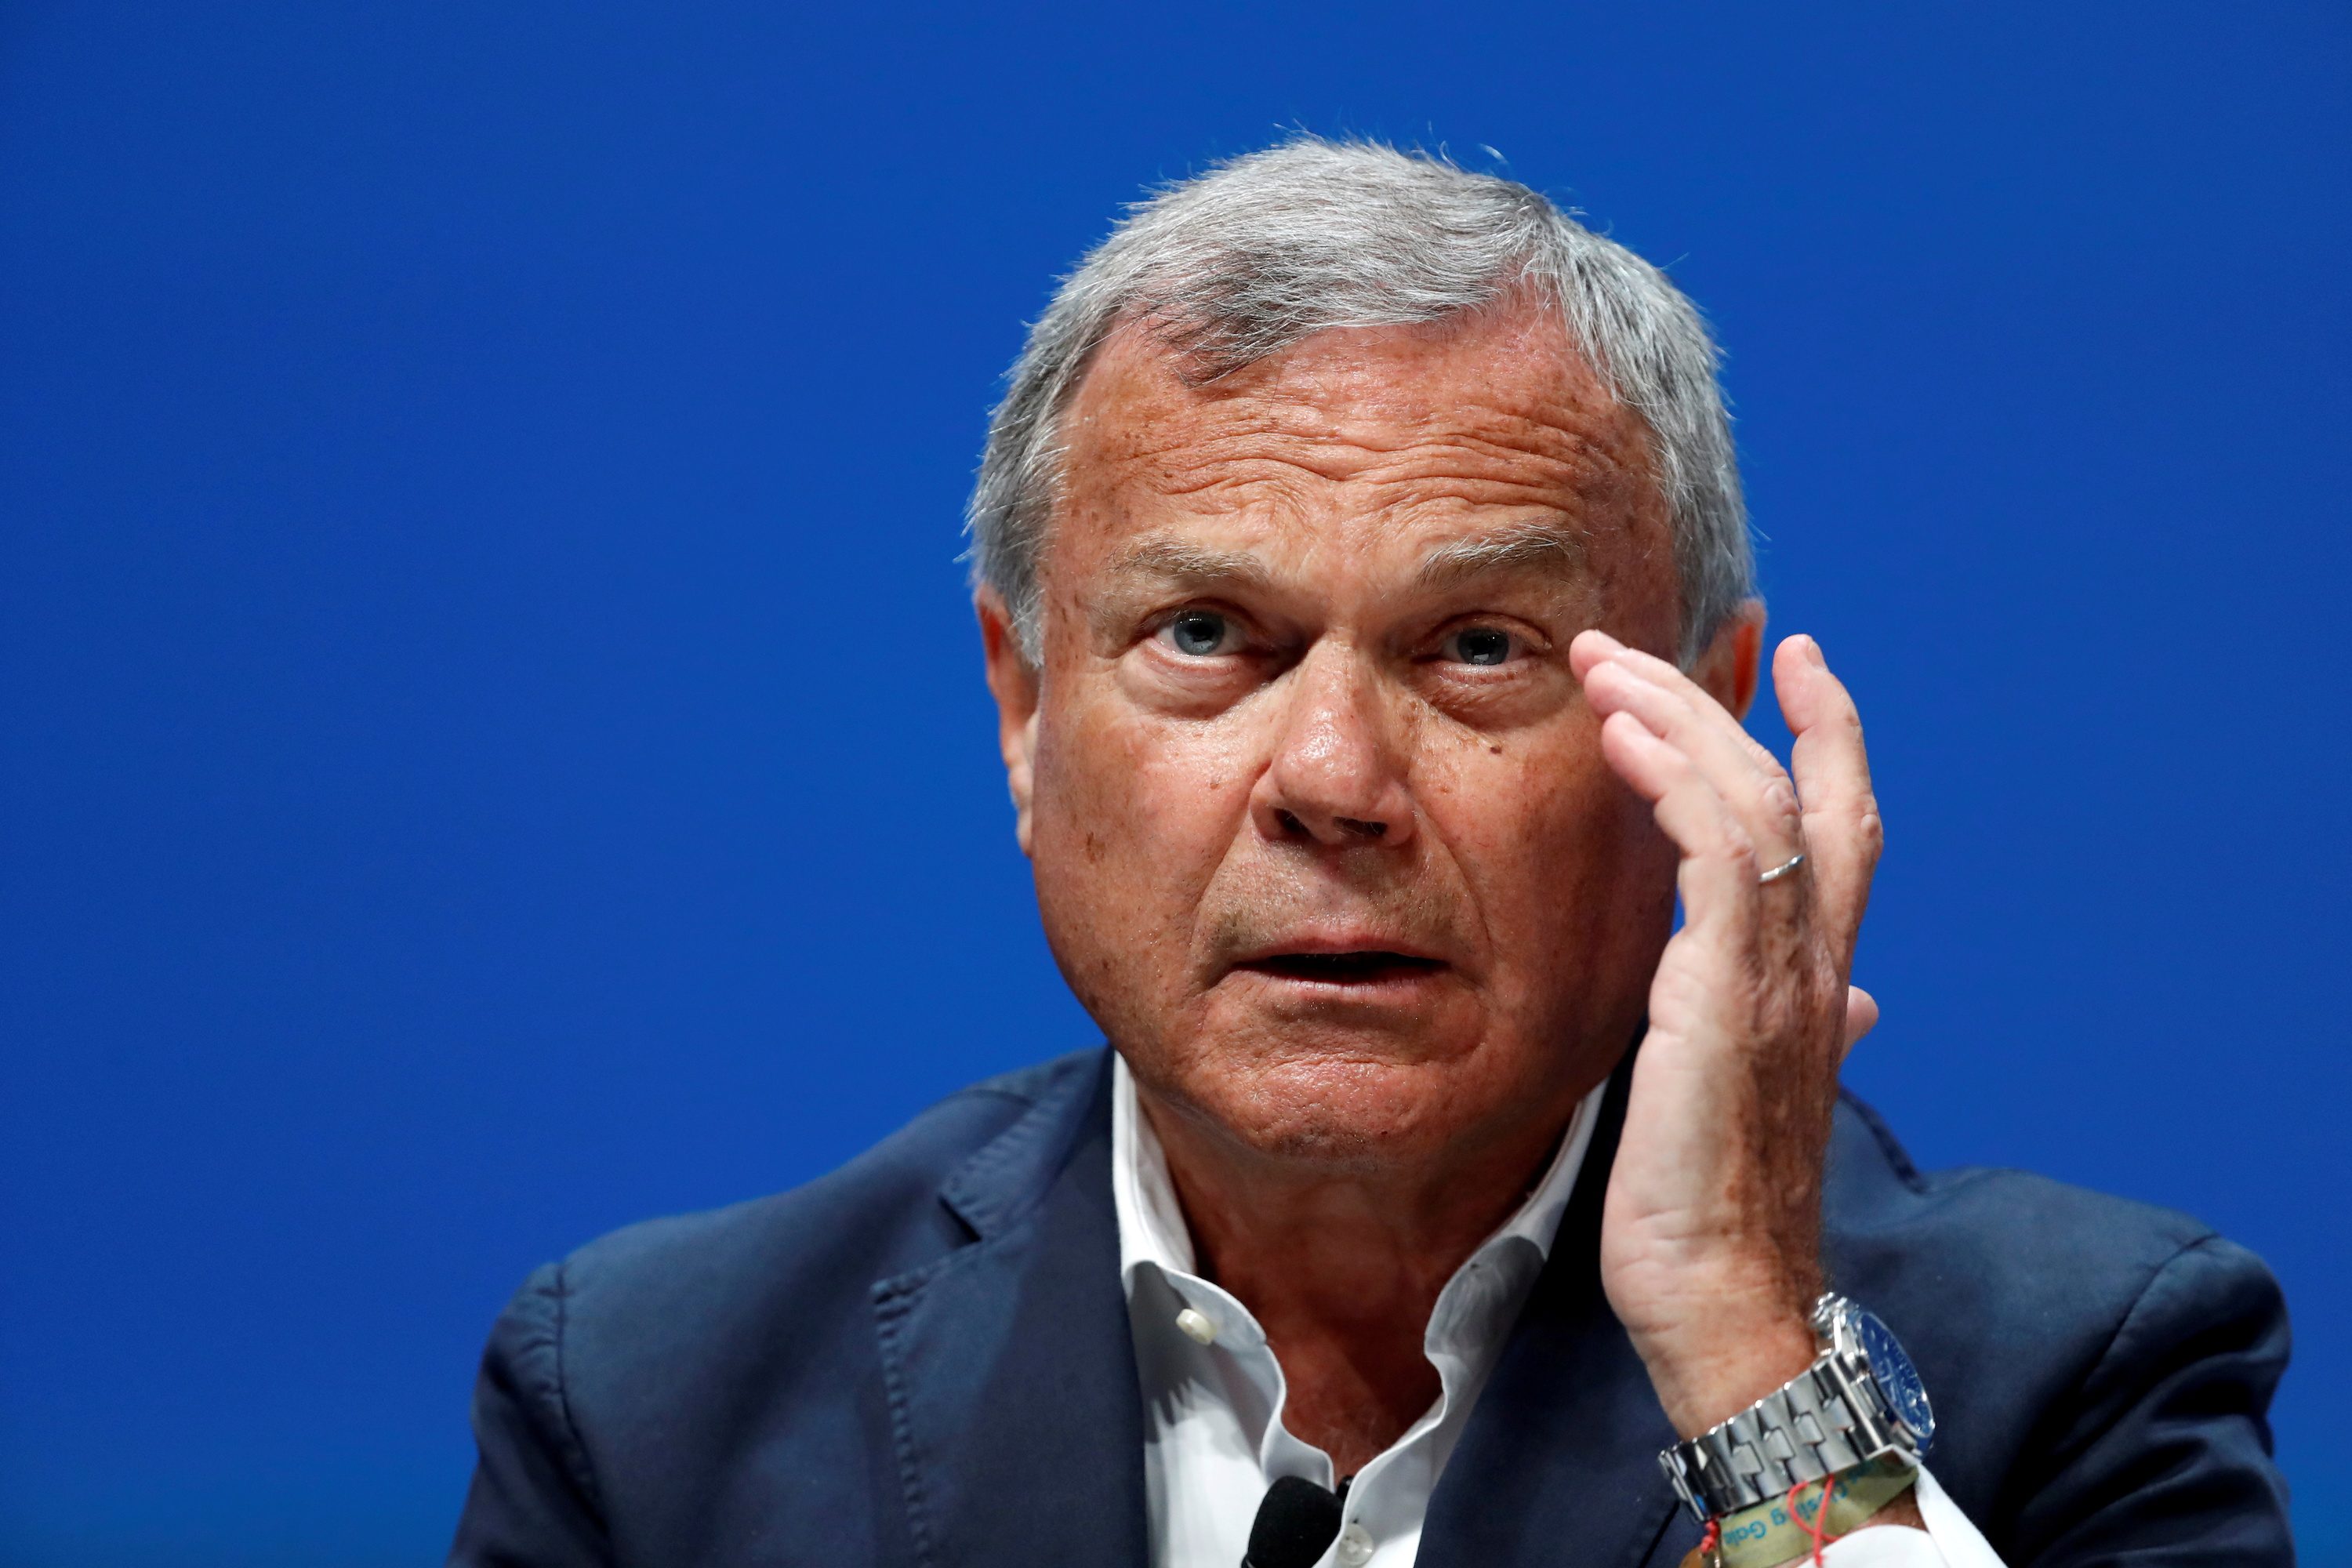 WPP goes into open conflict with former CEO Sorrell